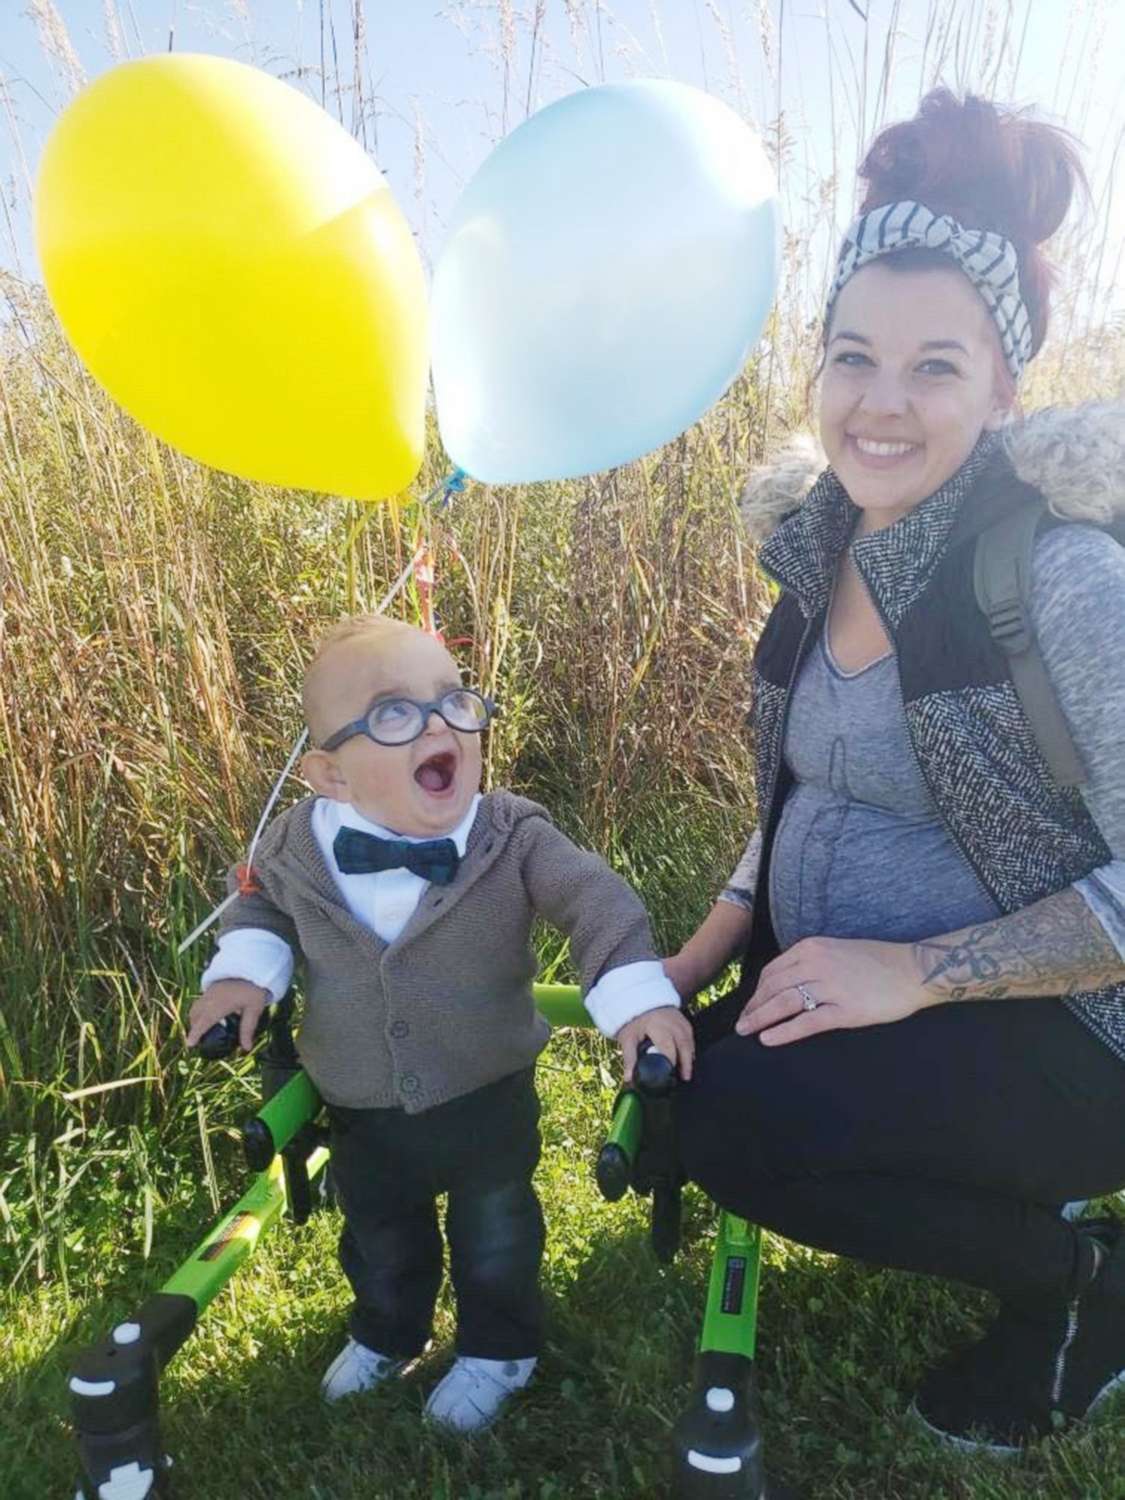 PHOTO: Brantley Morse, 2, smiles at his mother, Brittany Morse, while dressed as Carl from the Pixar film, "Up," at a fall festival in Ohio, October 2019.